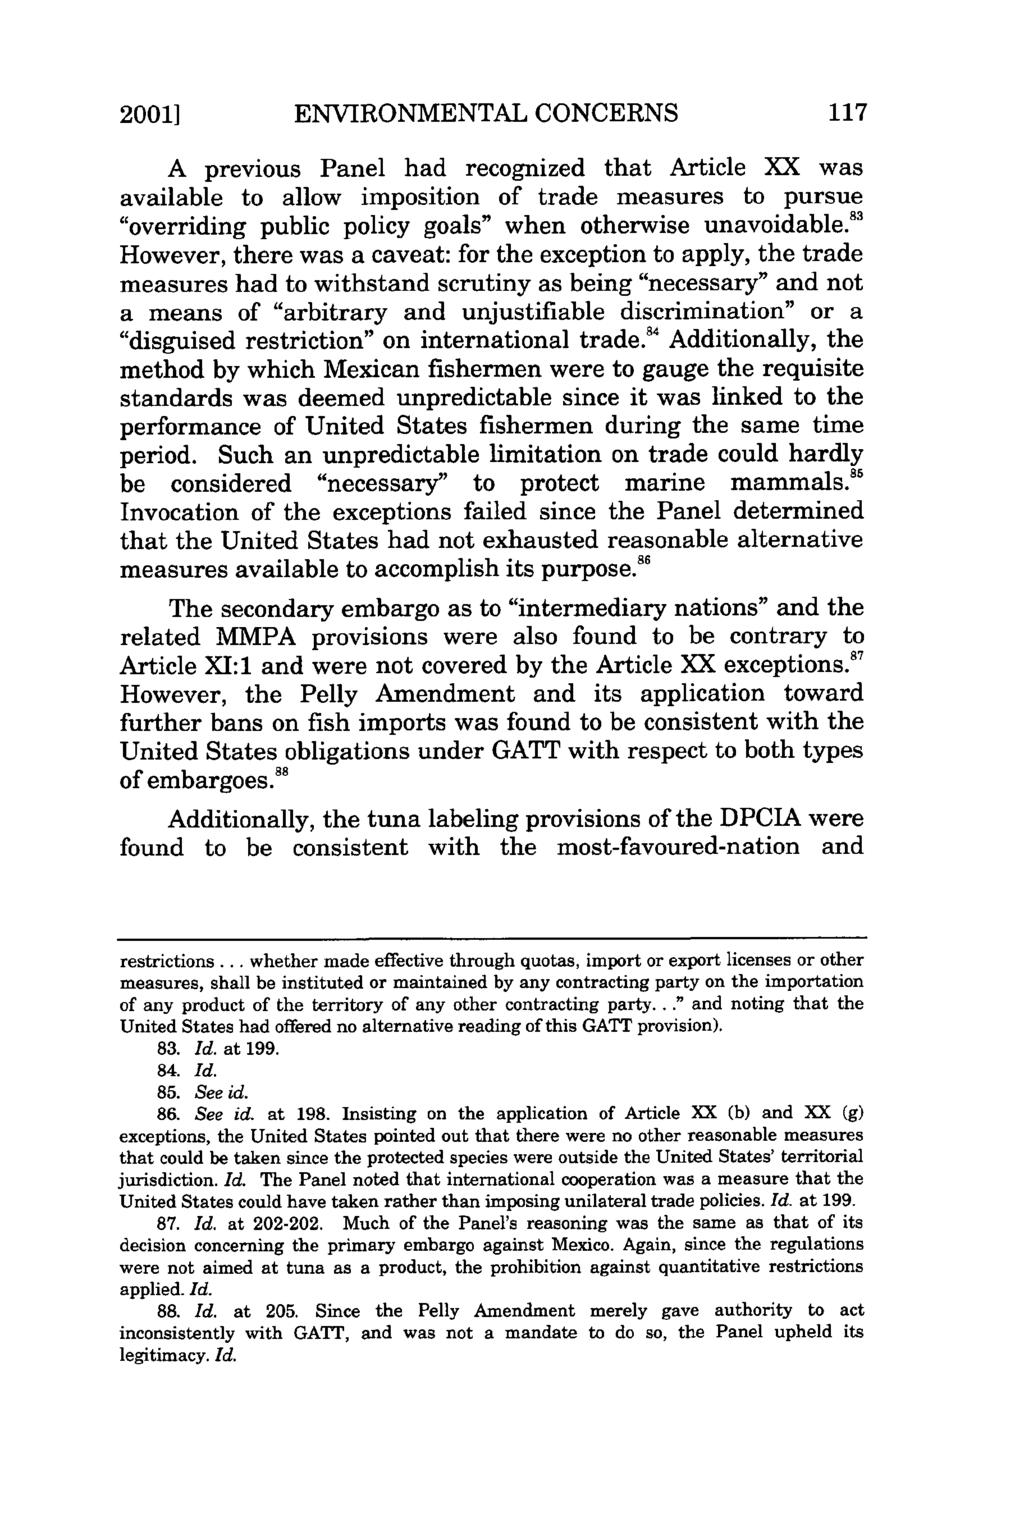 2001] ENVIRONMENTAL CONCERNS A previous Panel had recognized that Article XX was available to allow imposition of trade measures to pursue "overriding public policy goals" when otherwise unavoidable.